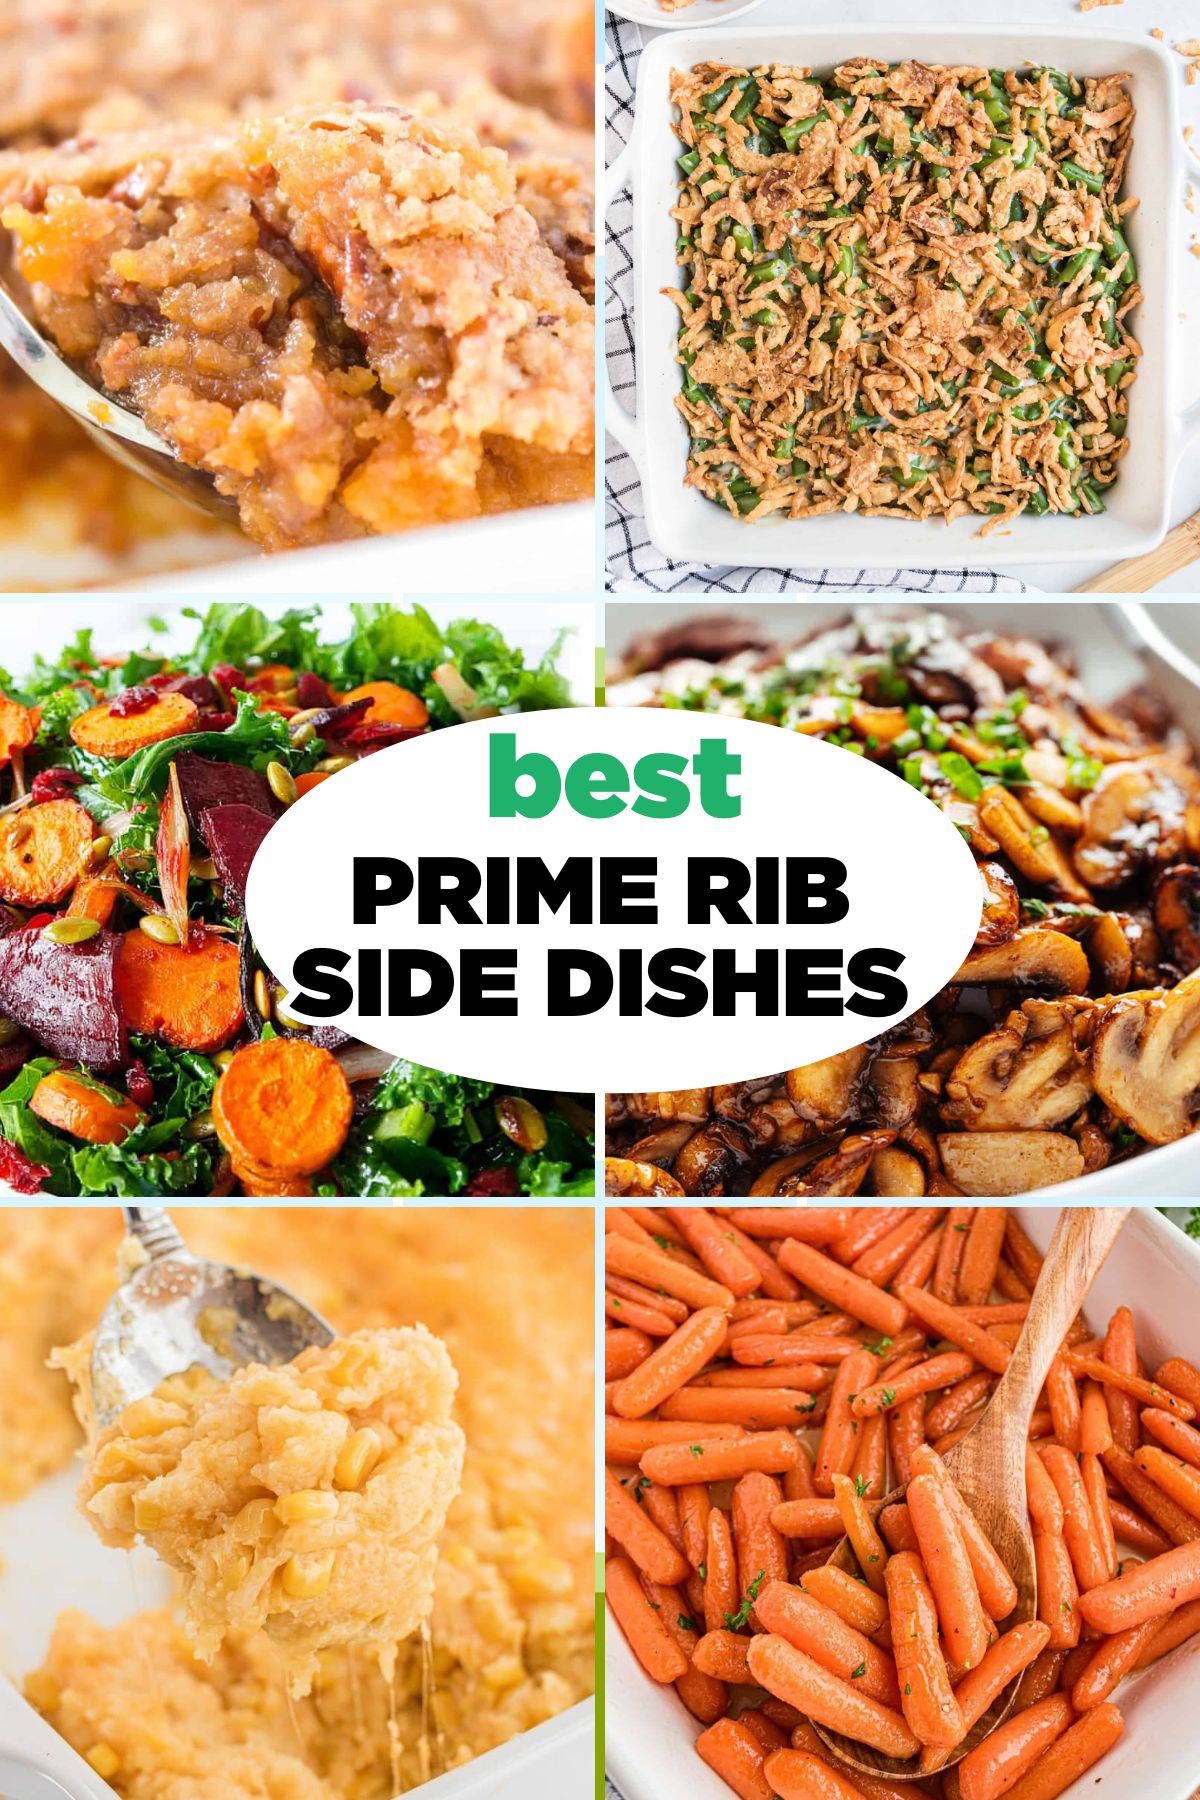 Top prime rib side dishes.